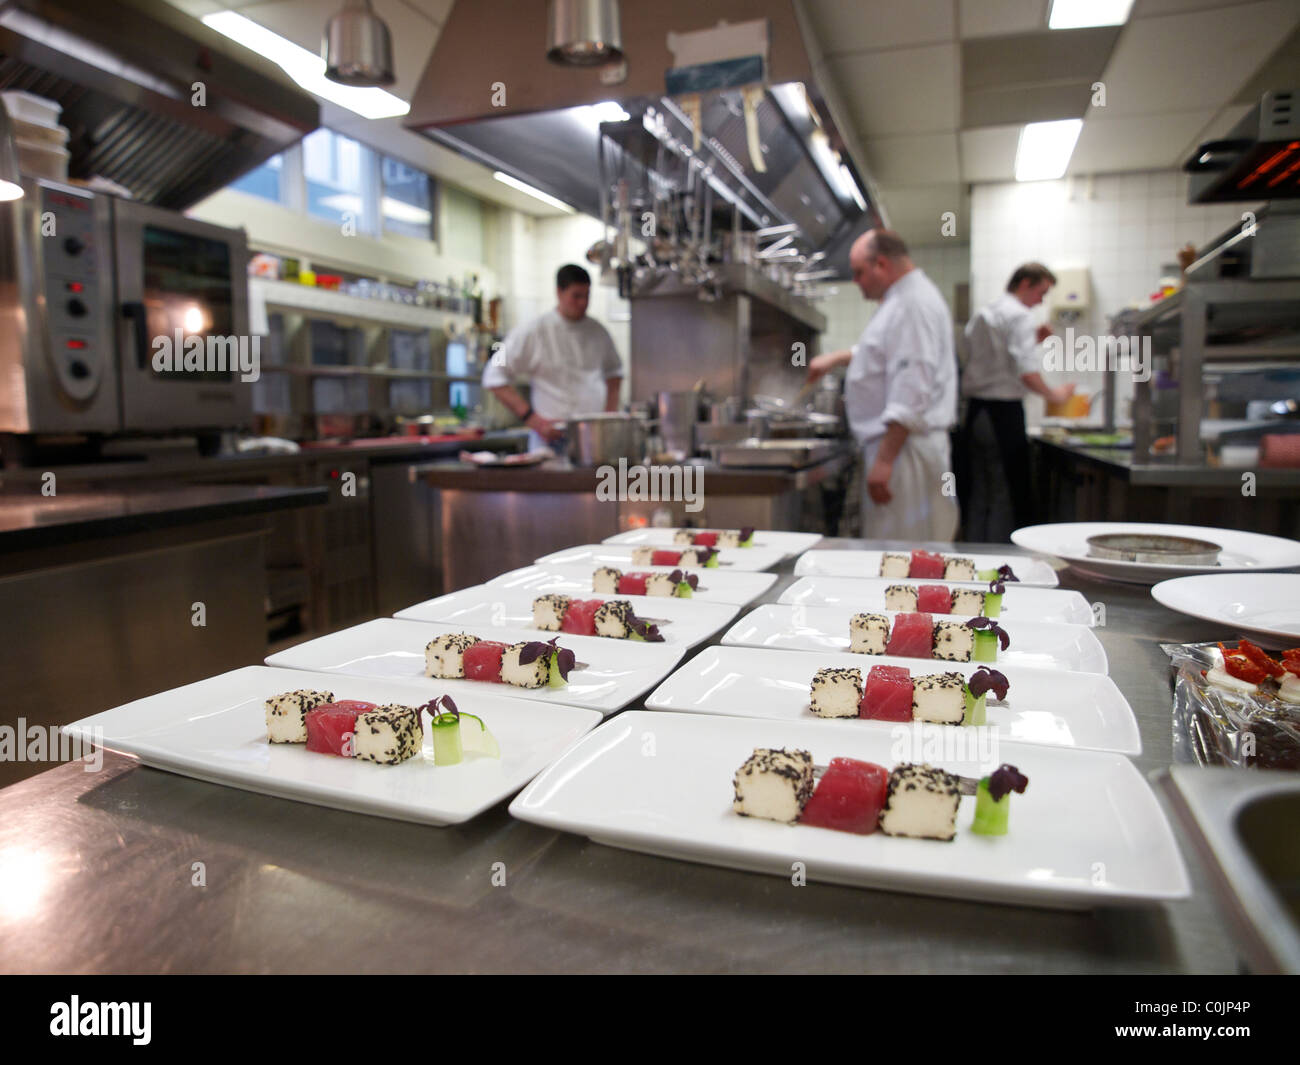 Professional restaurant kitchen with mise en place in the foreground and people working in the background Stock Photo